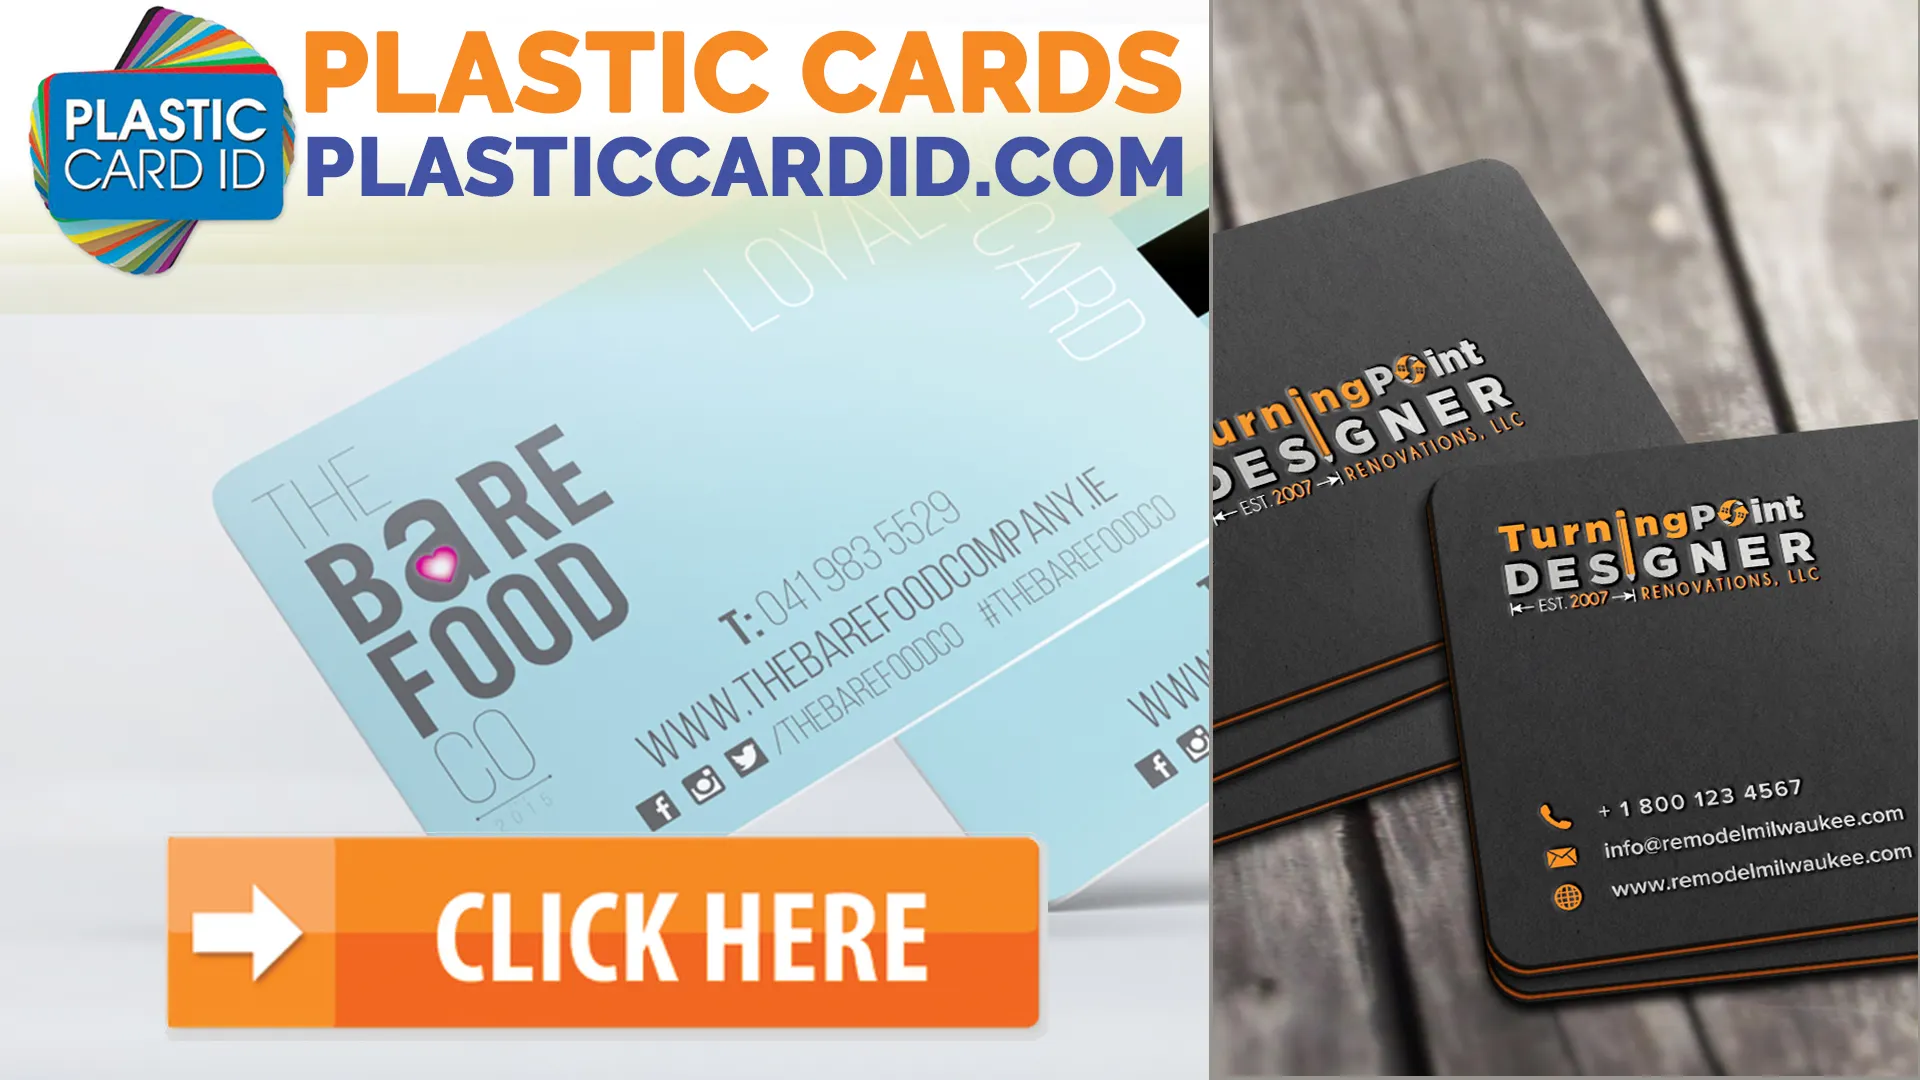 Cultural Preferences and Your Plastic Cards